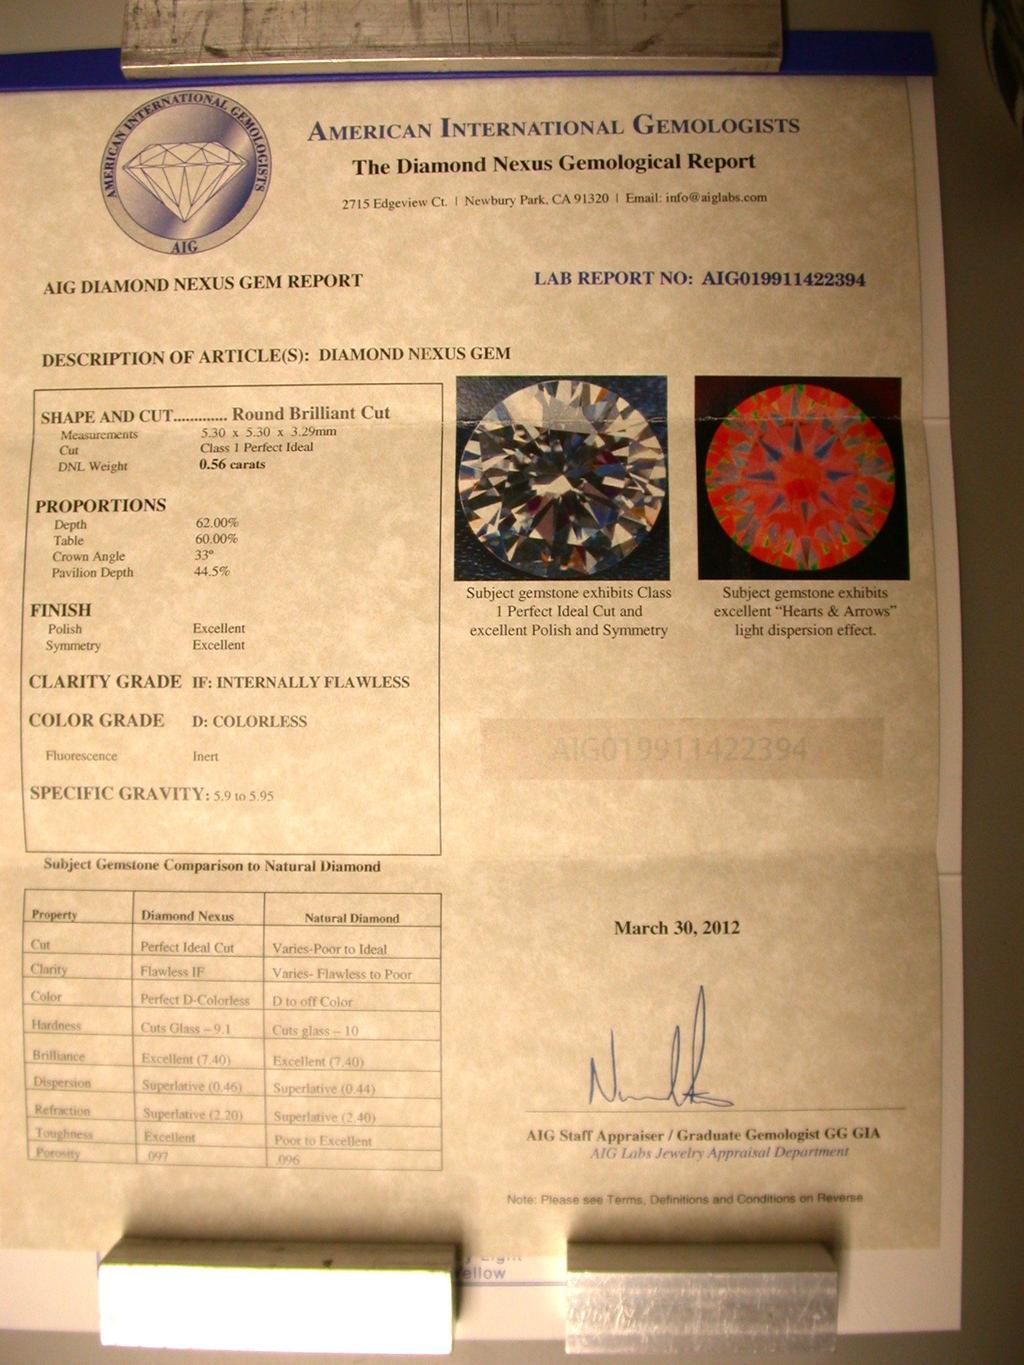 Fig. 3. The Diamond Nexus Labs Gemological Report for the examined gemstone.